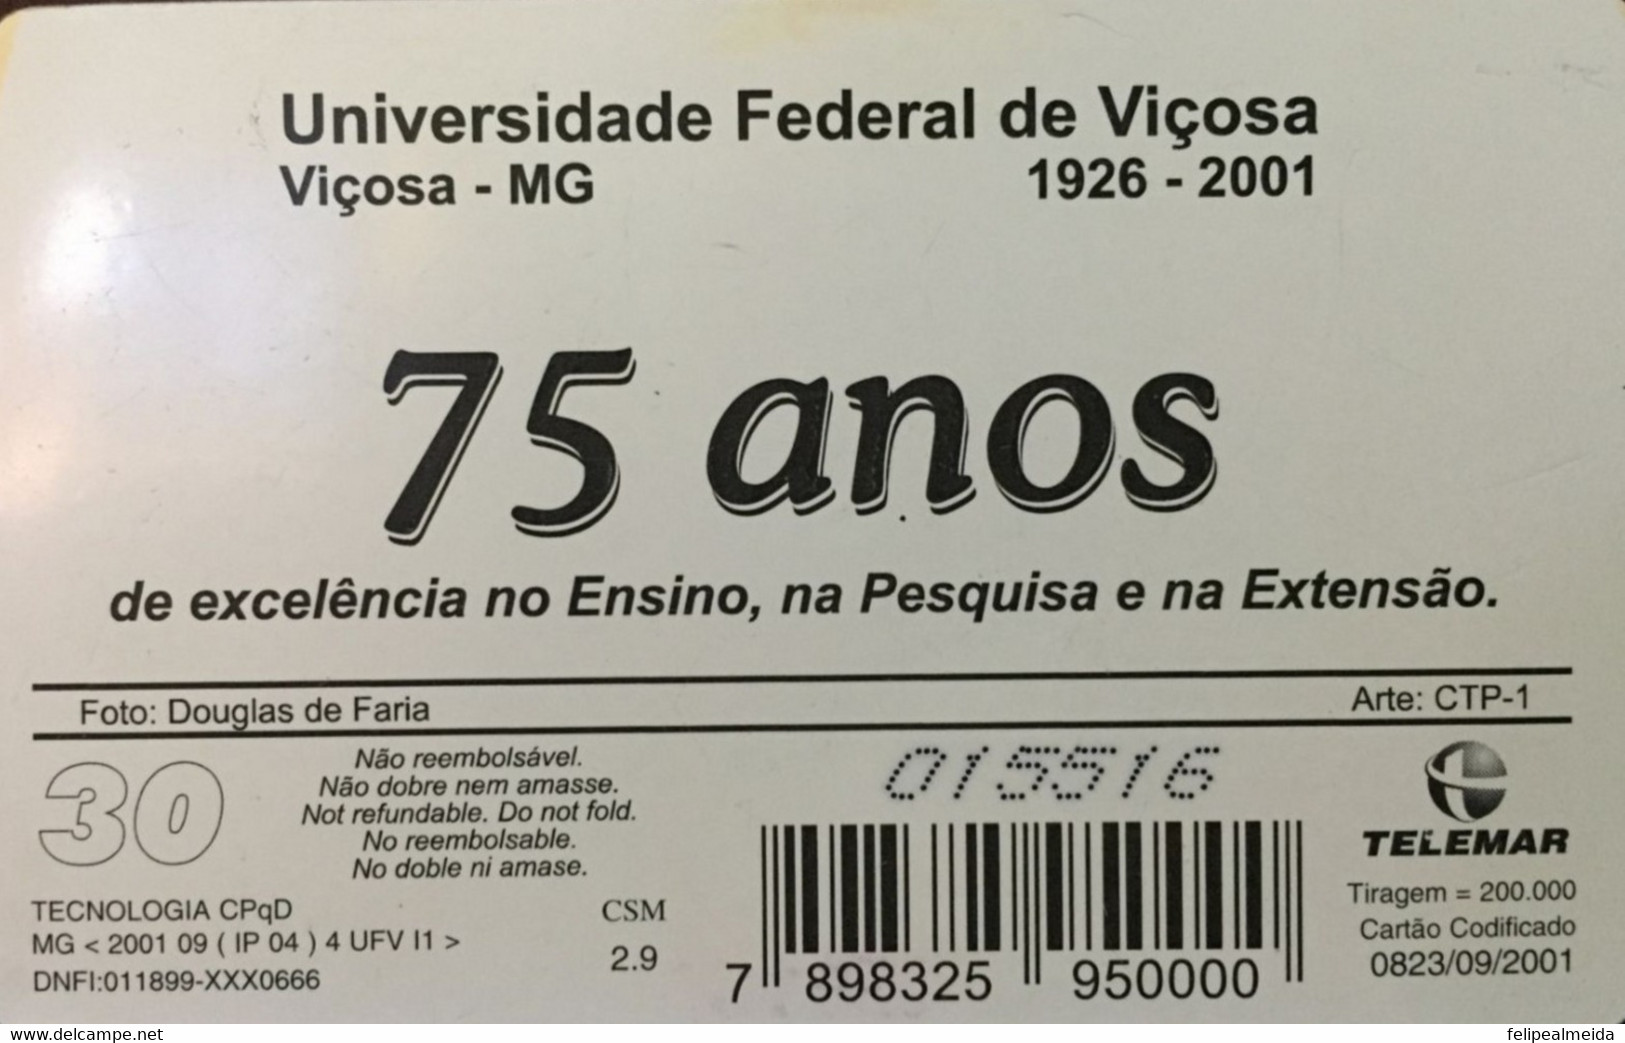 Phone Card Manufactured By Telemar In 2001 - 75 Years Of The Federal University Of Viçosa 1926 To 2001 - Photographer Do - Culture